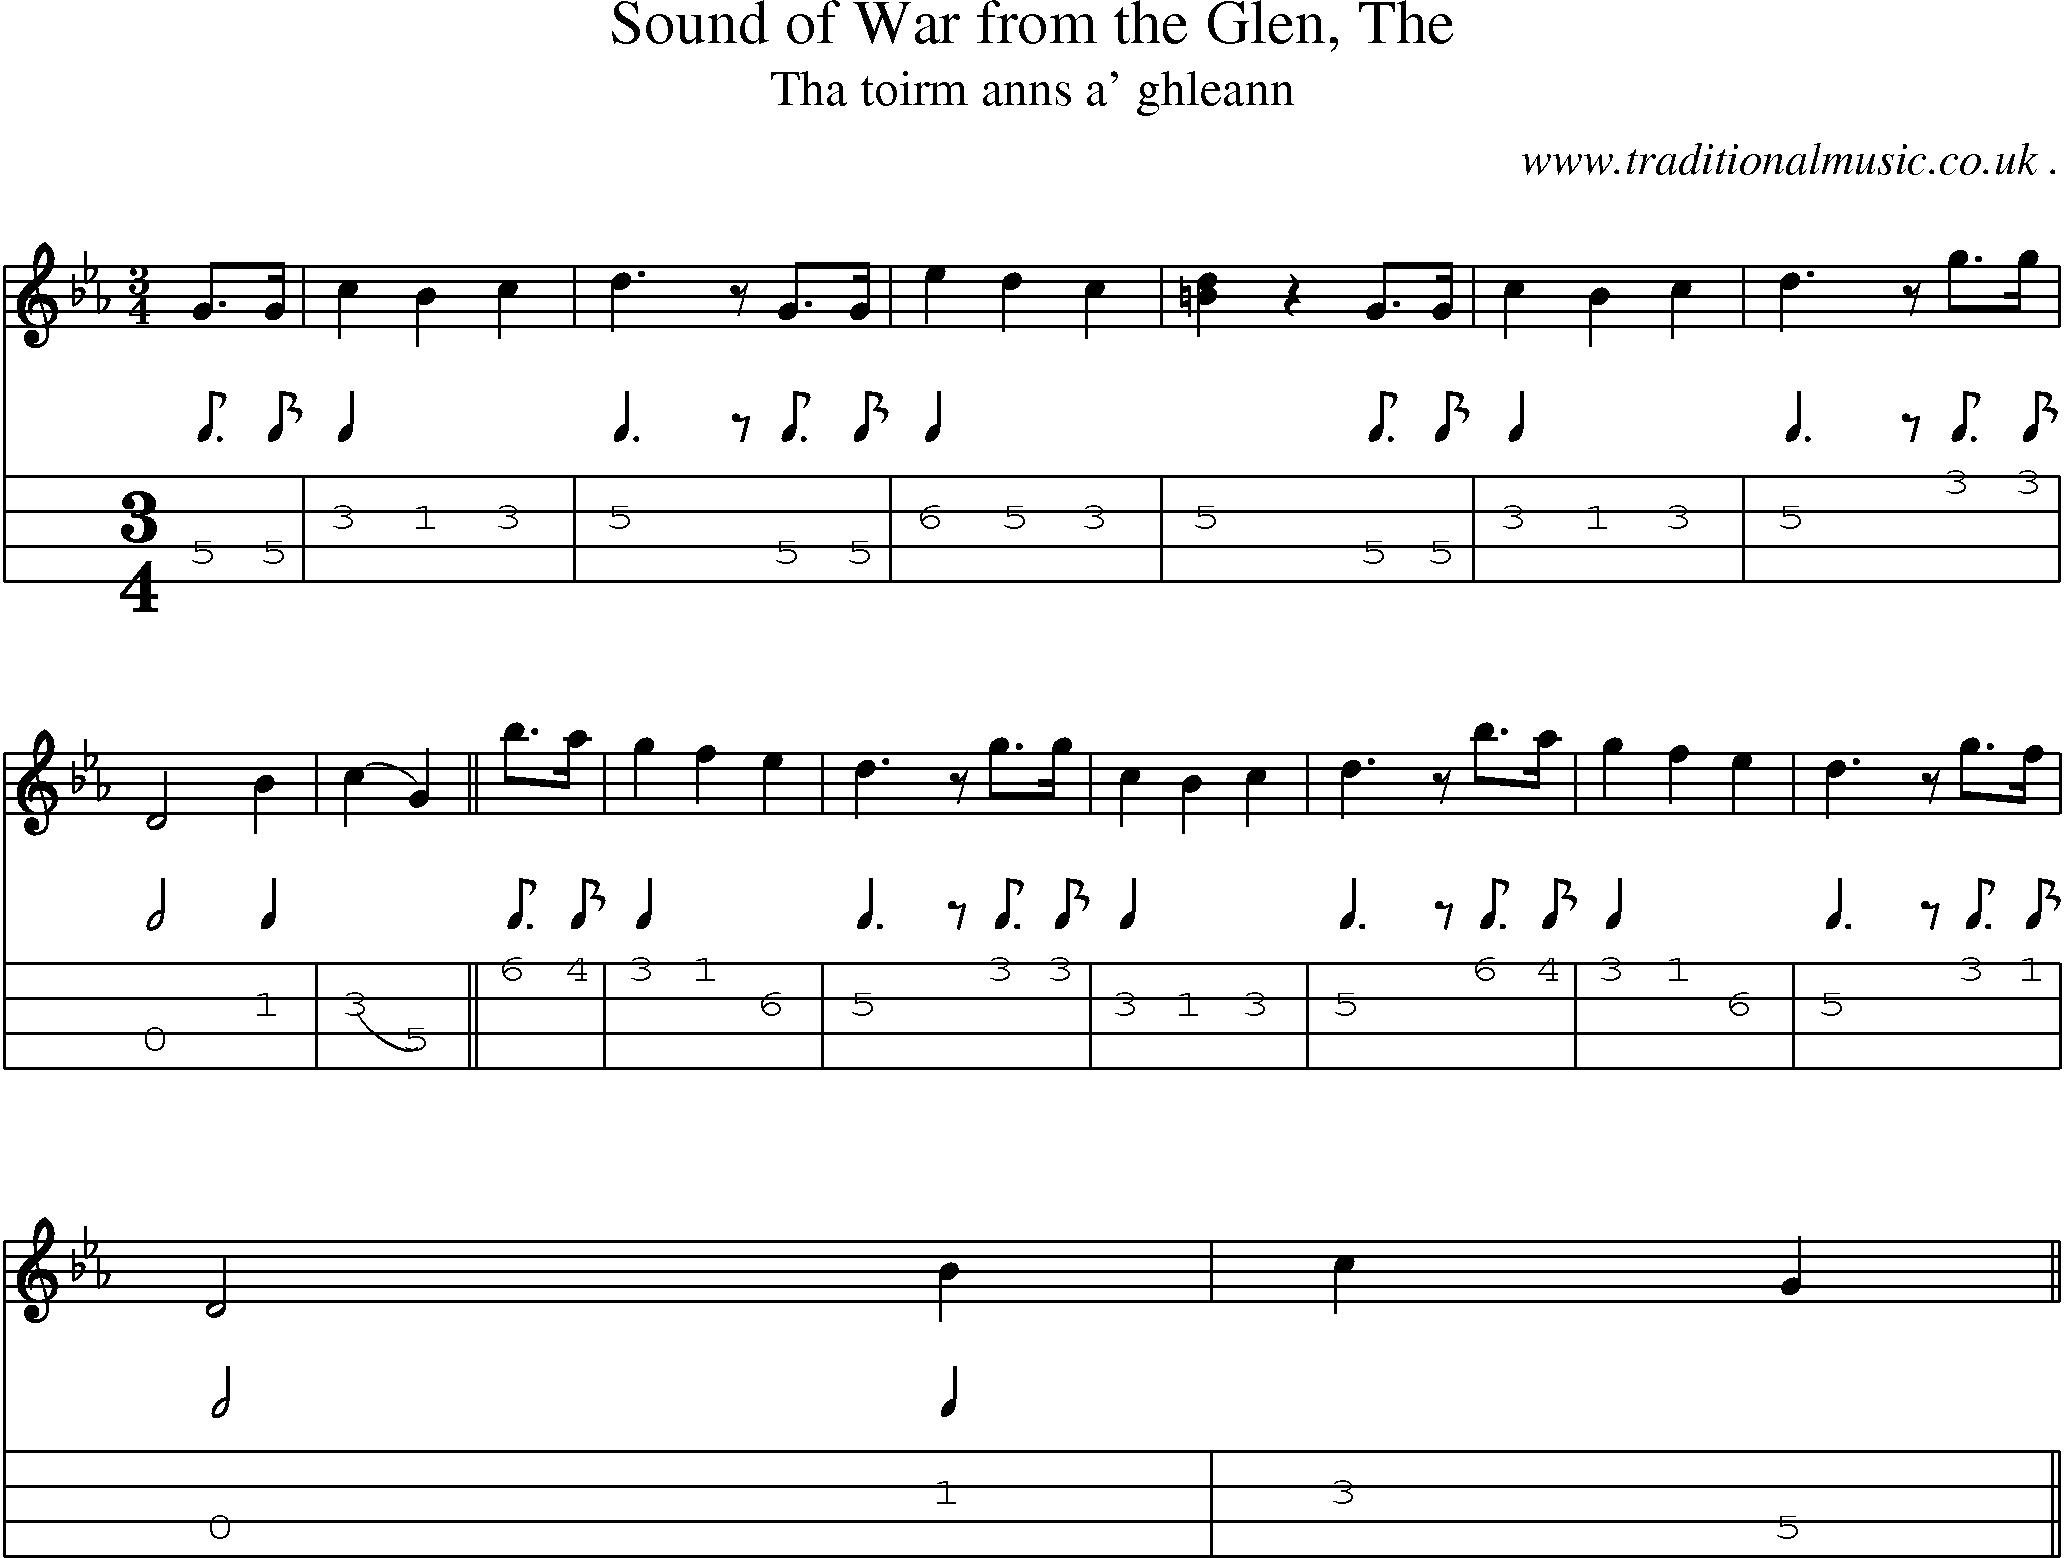 Sheet-music  score, Chords and Mandolin Tabs for Sound Of War From The Glen The